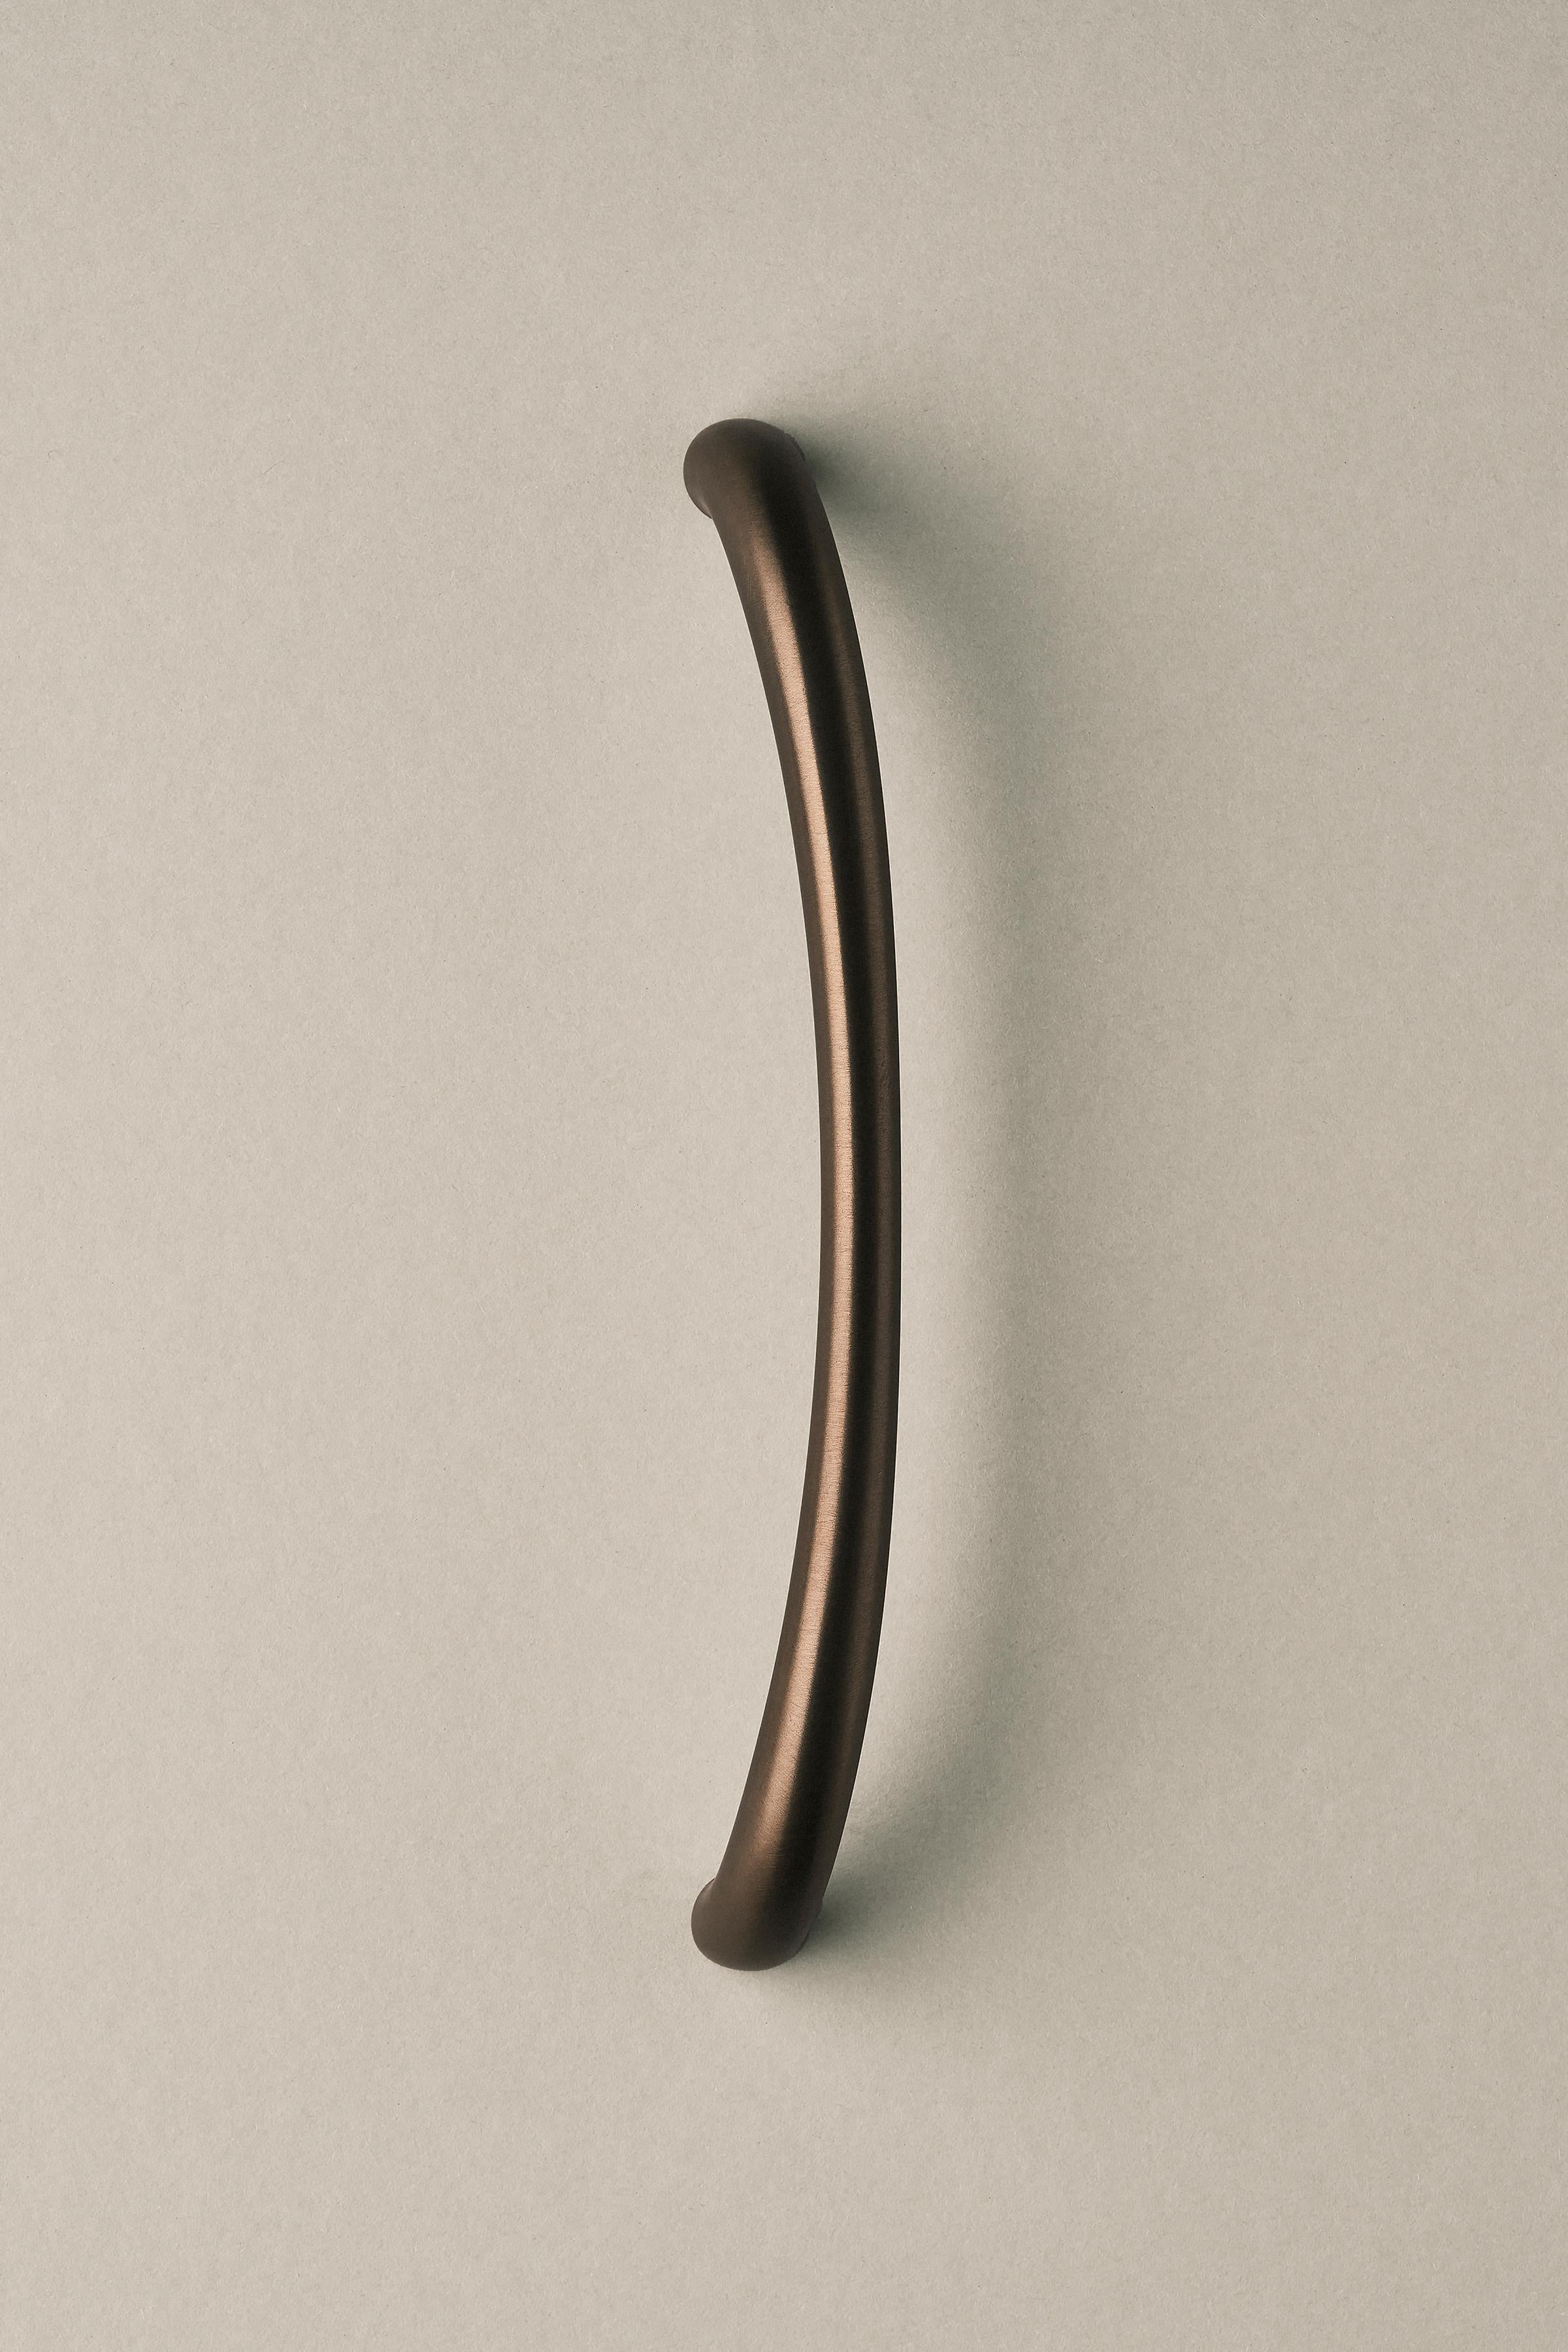 Contemporary Door Handle / Knob 'Suave' by Spaces Within, Dark Brass For Sale 4